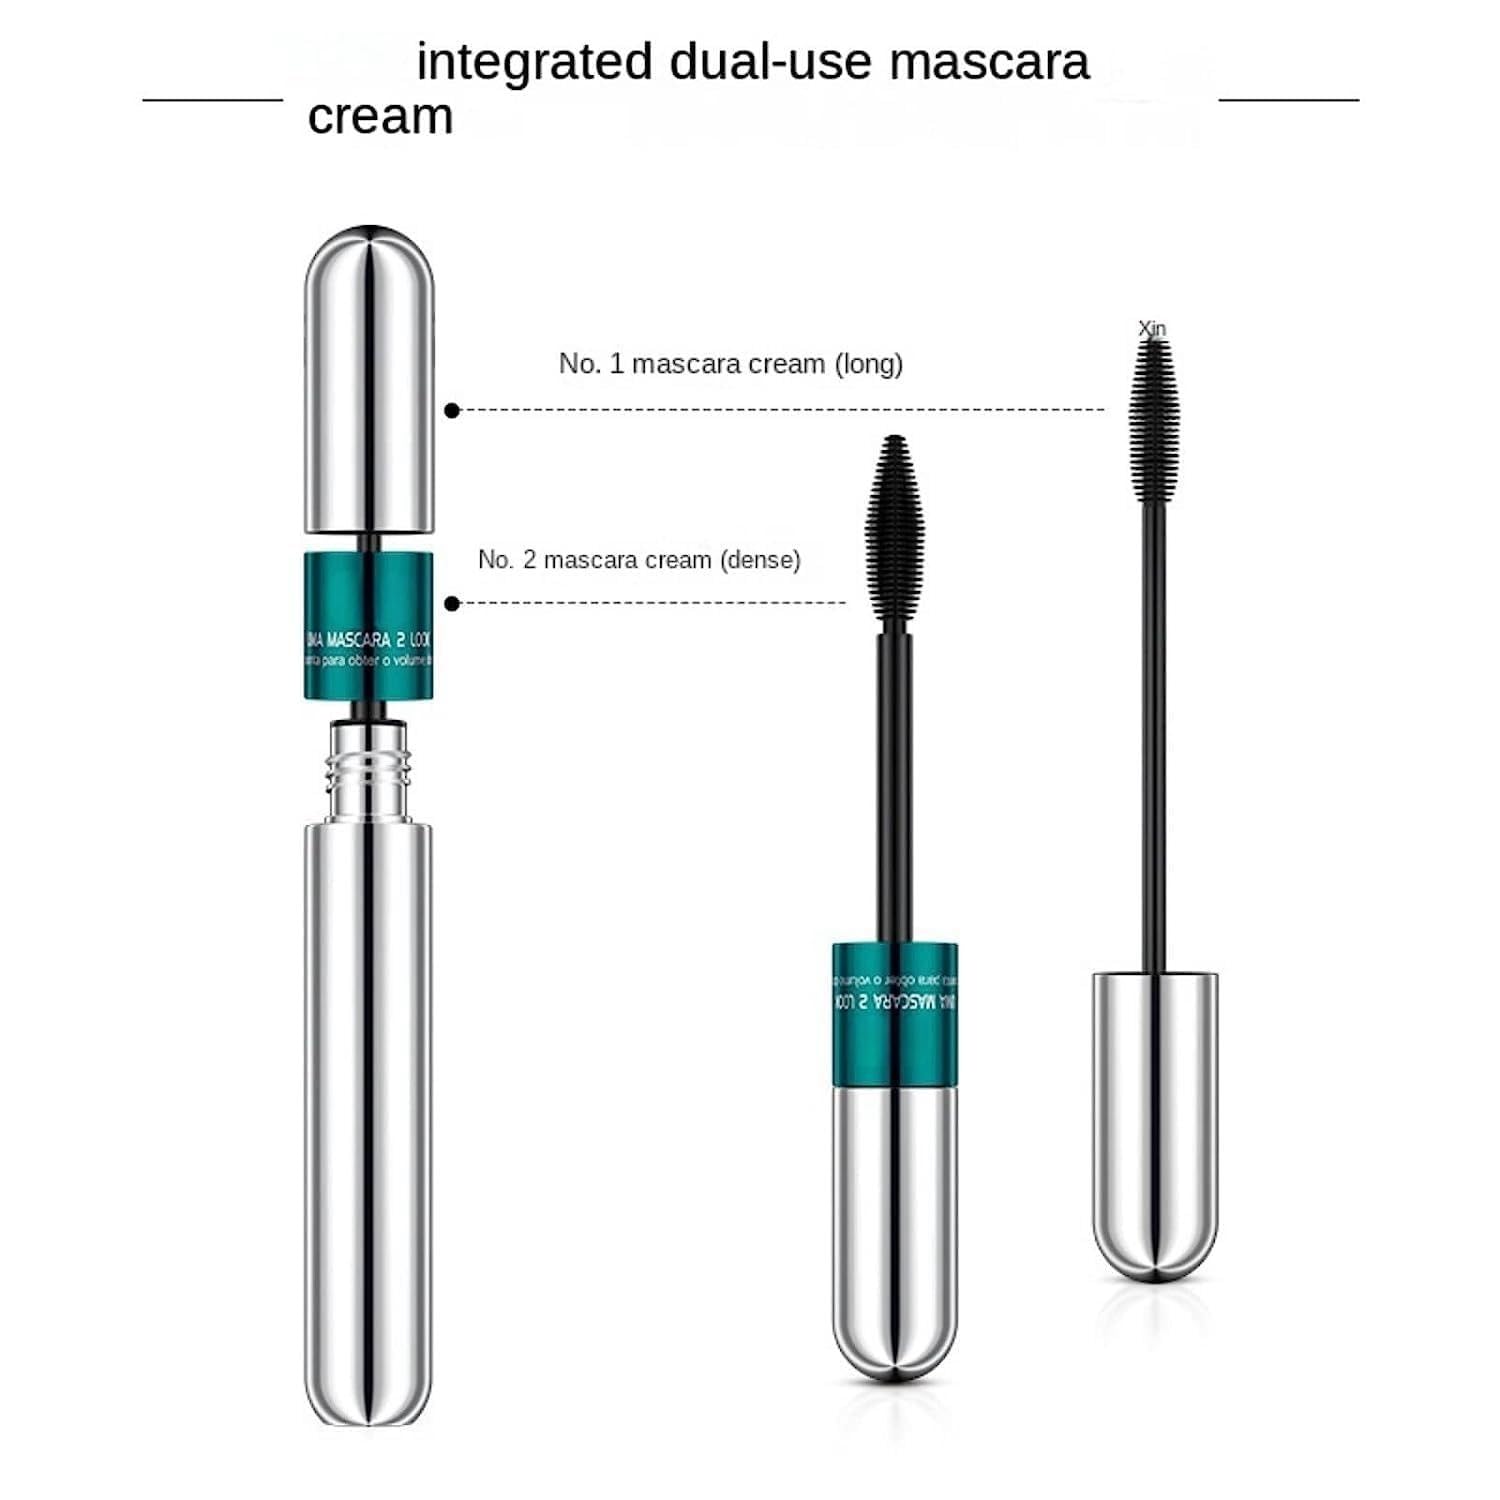 2in1 4D Waterproof Mascara Long-5x Longer Formula for Fuller Lashes - Intense Black Mascara for Thick and Full Lashes